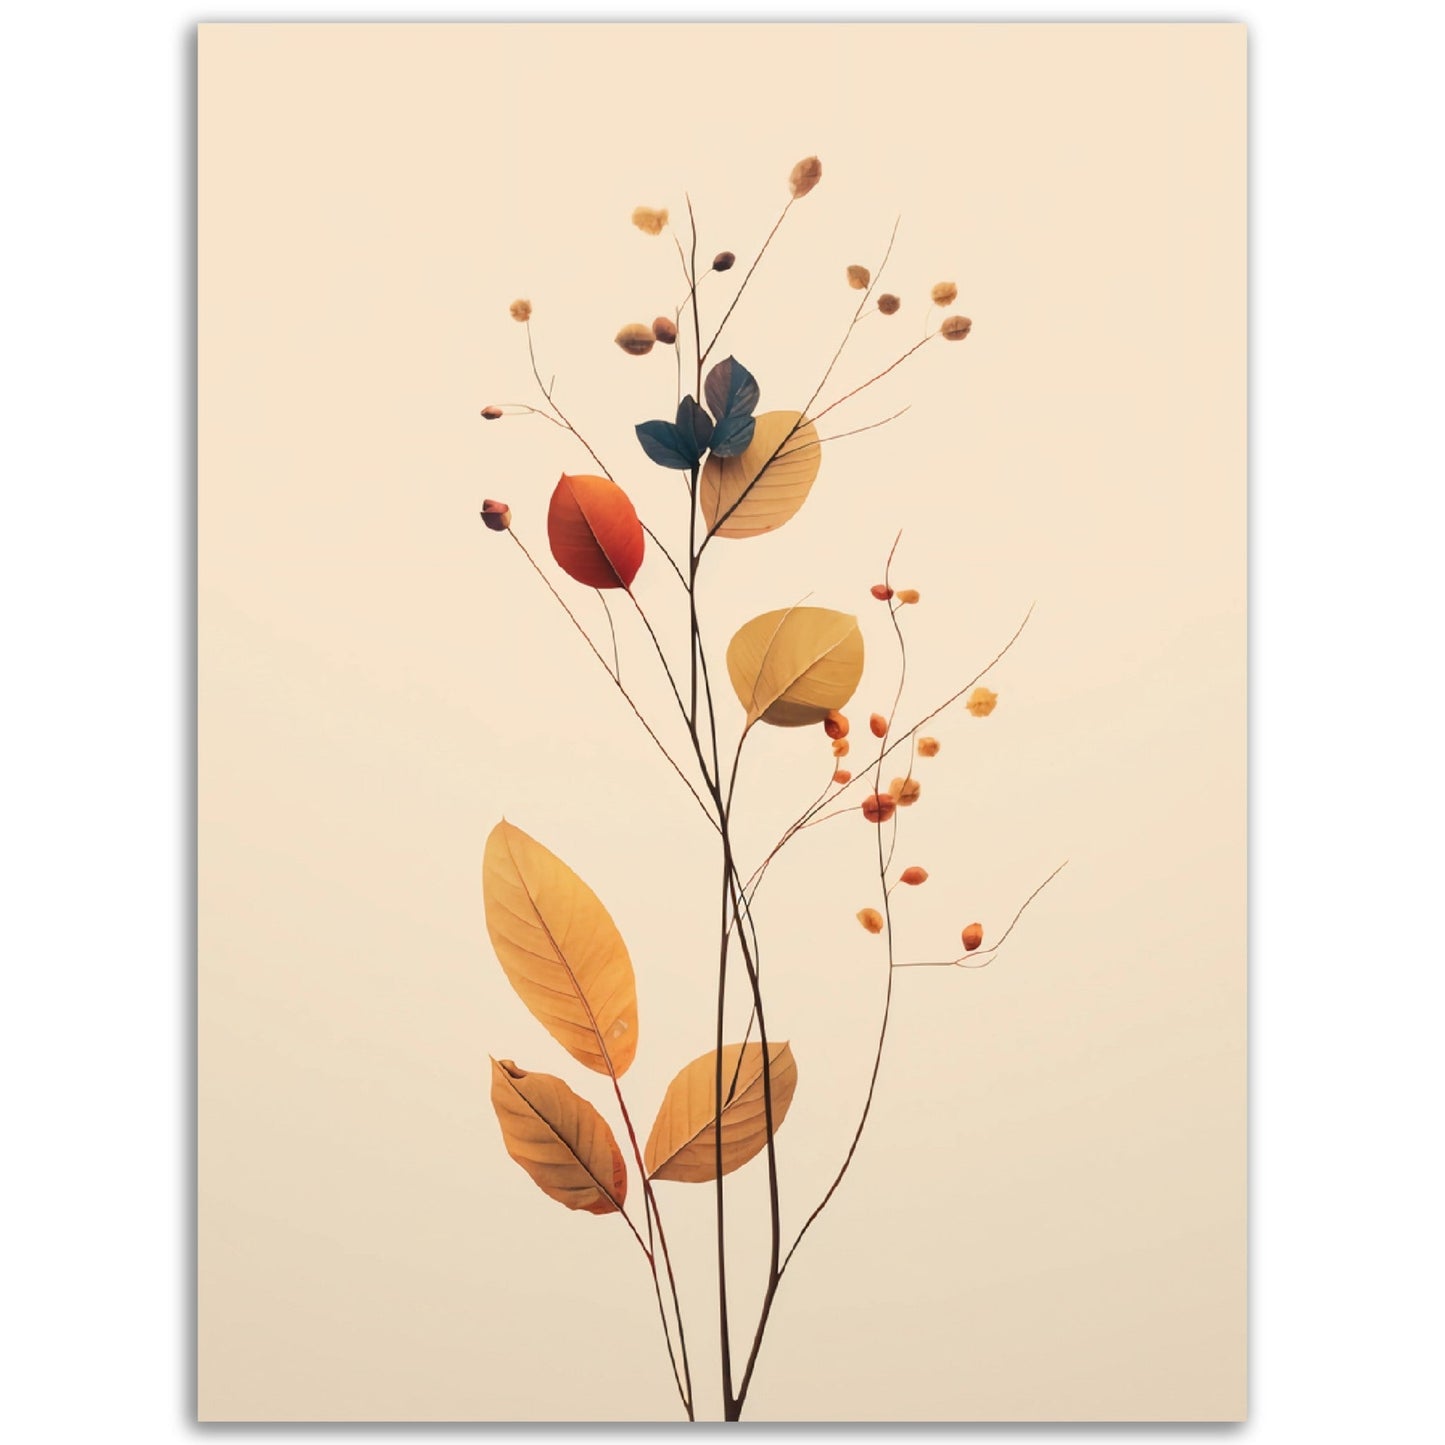 An Autumn Arrangement of a flower and leaves on a beige background.